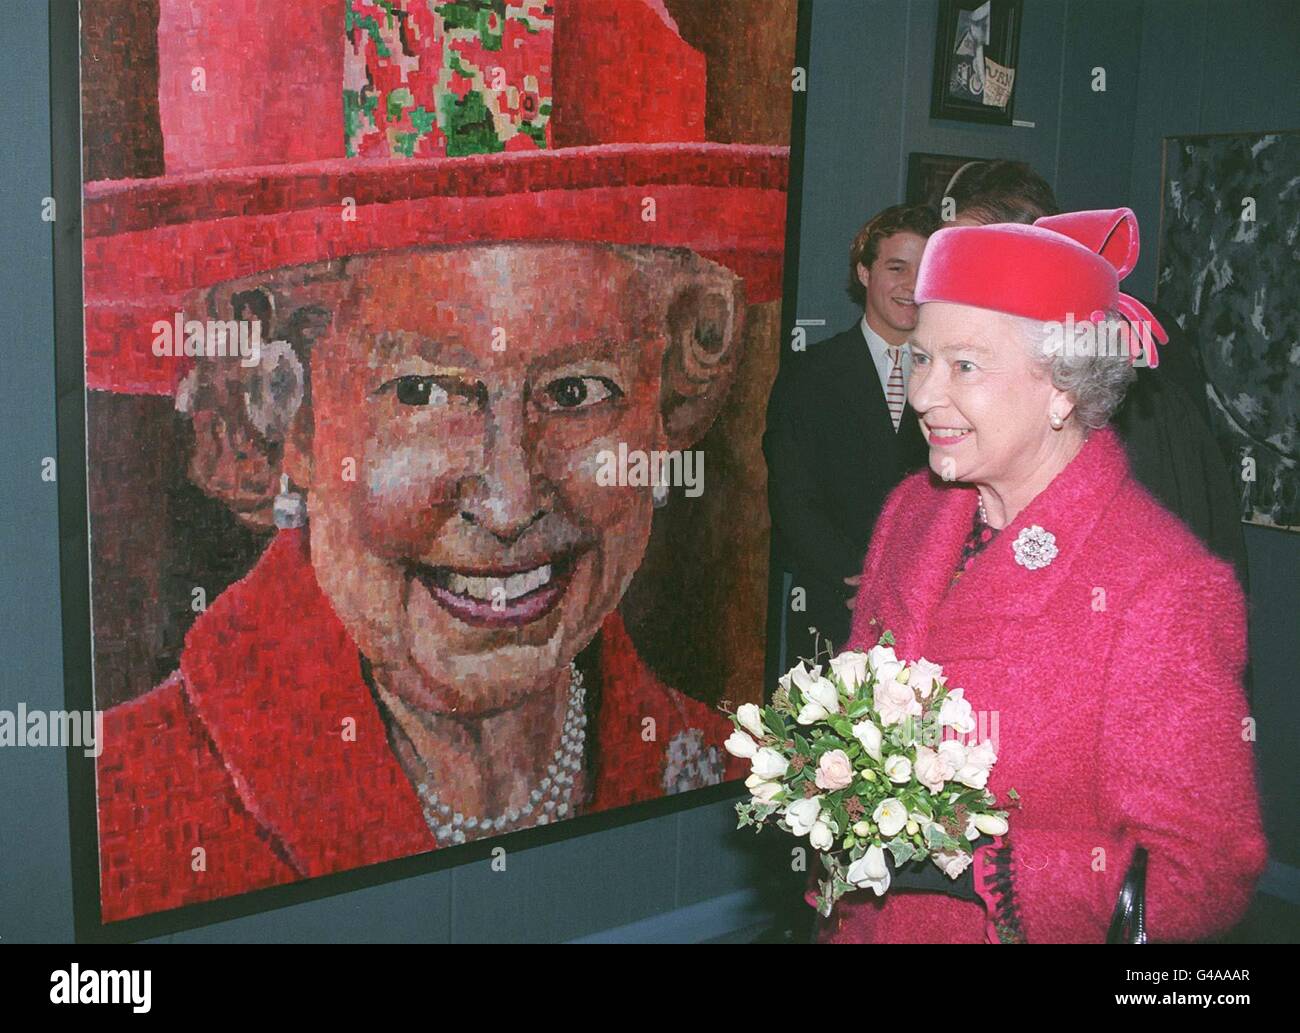 The Queen admires a portrait of herself painted by sixth former Peter Hawkins (at rear), during a visit with the Duke of Edinburgh to Radley College, Abingdon, Oxon, to open a new building today (Thursday). WPA Rota picture by John Stillwell/PA Stock Photo